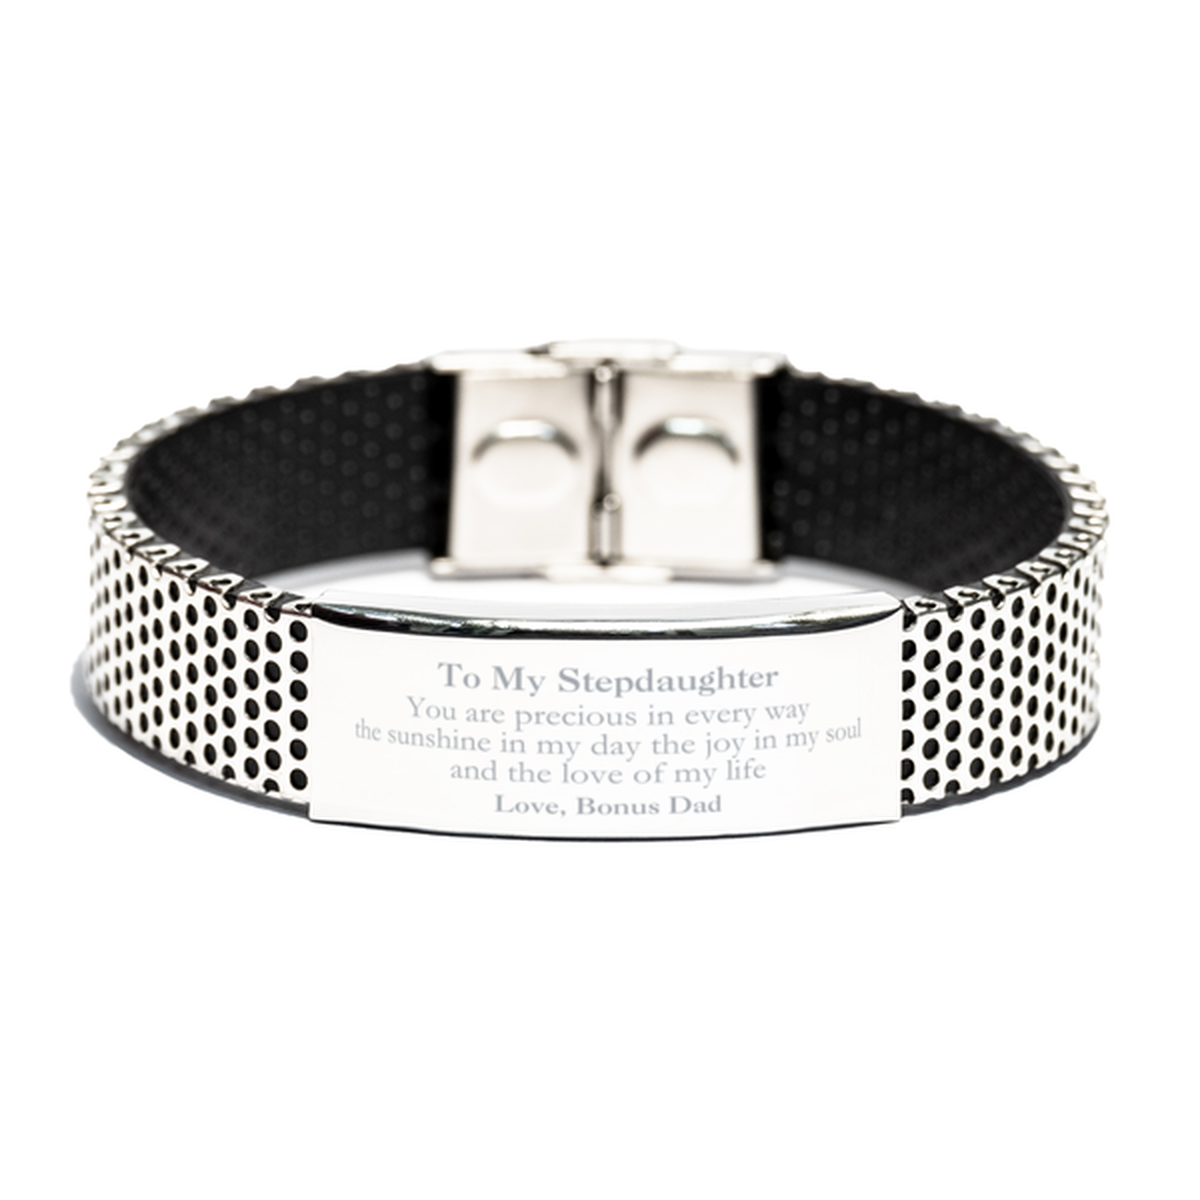 Graduation Gifts for Stepdaughter Stainless Steel Bracelet Present from Bonus Dad, Christmas Stepdaughter Birthday Gifts Stepdaughter You are precious in every way the sunshine in my day. Love, Bonus Dad